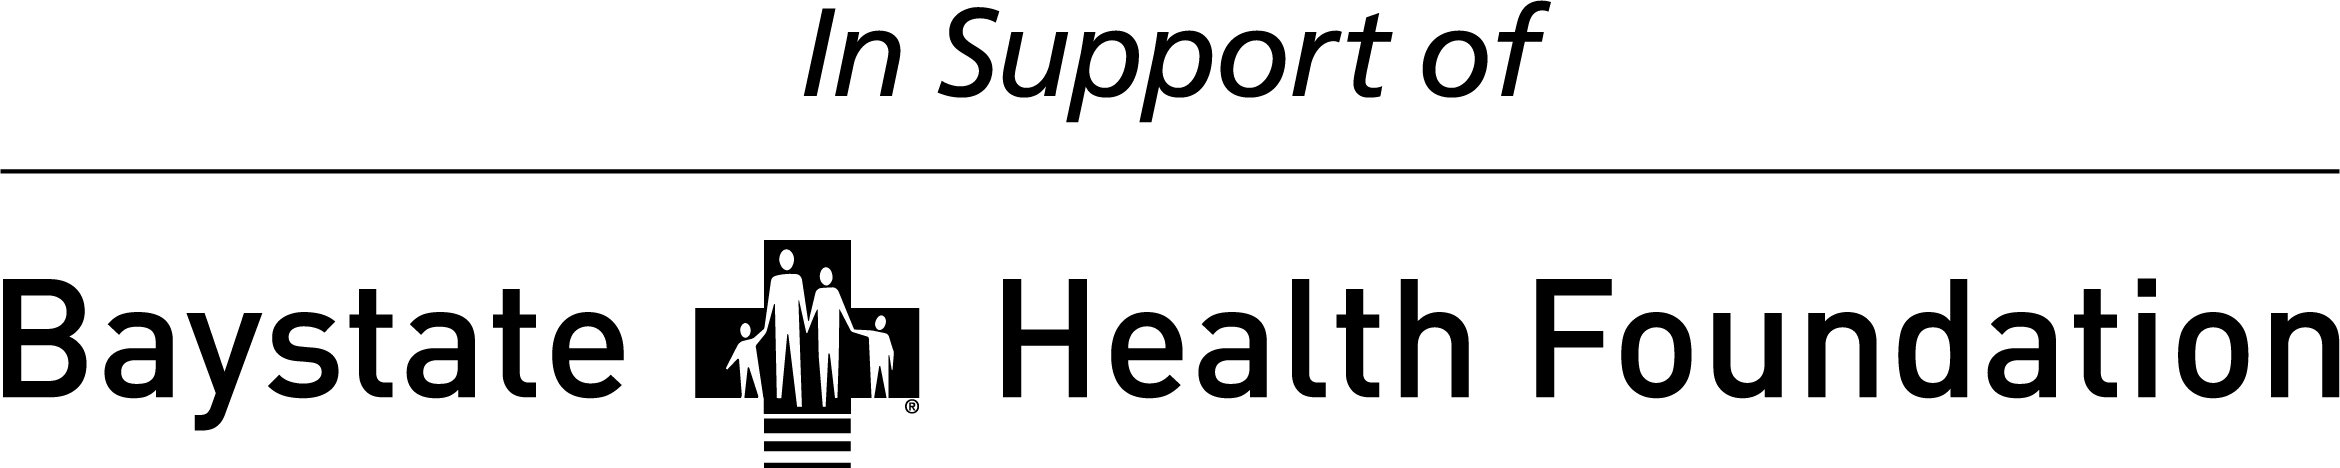 1815163-BHF_In_Support_of_logo_1L_blk.jpg